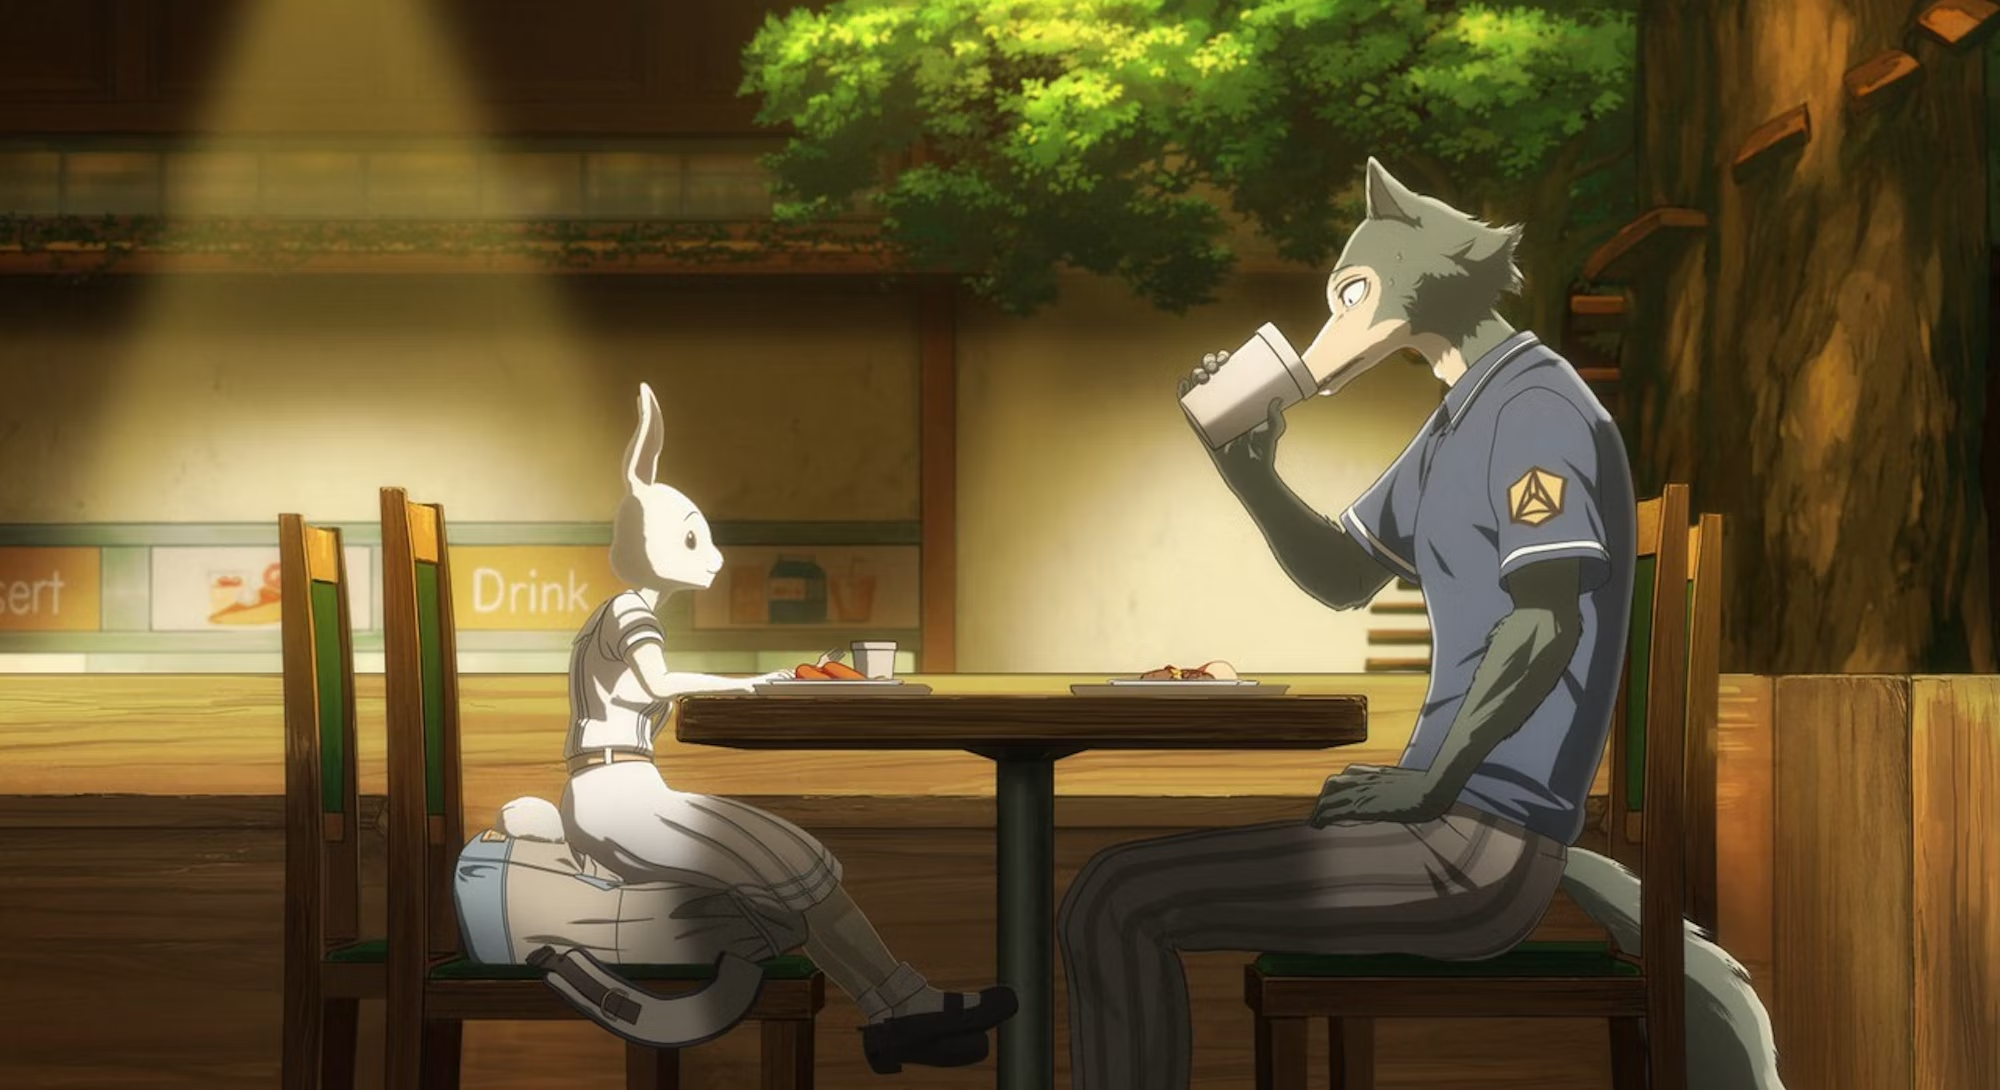 In the planet of Beastars, peaceful coexistence between human and animal species is the norm. 